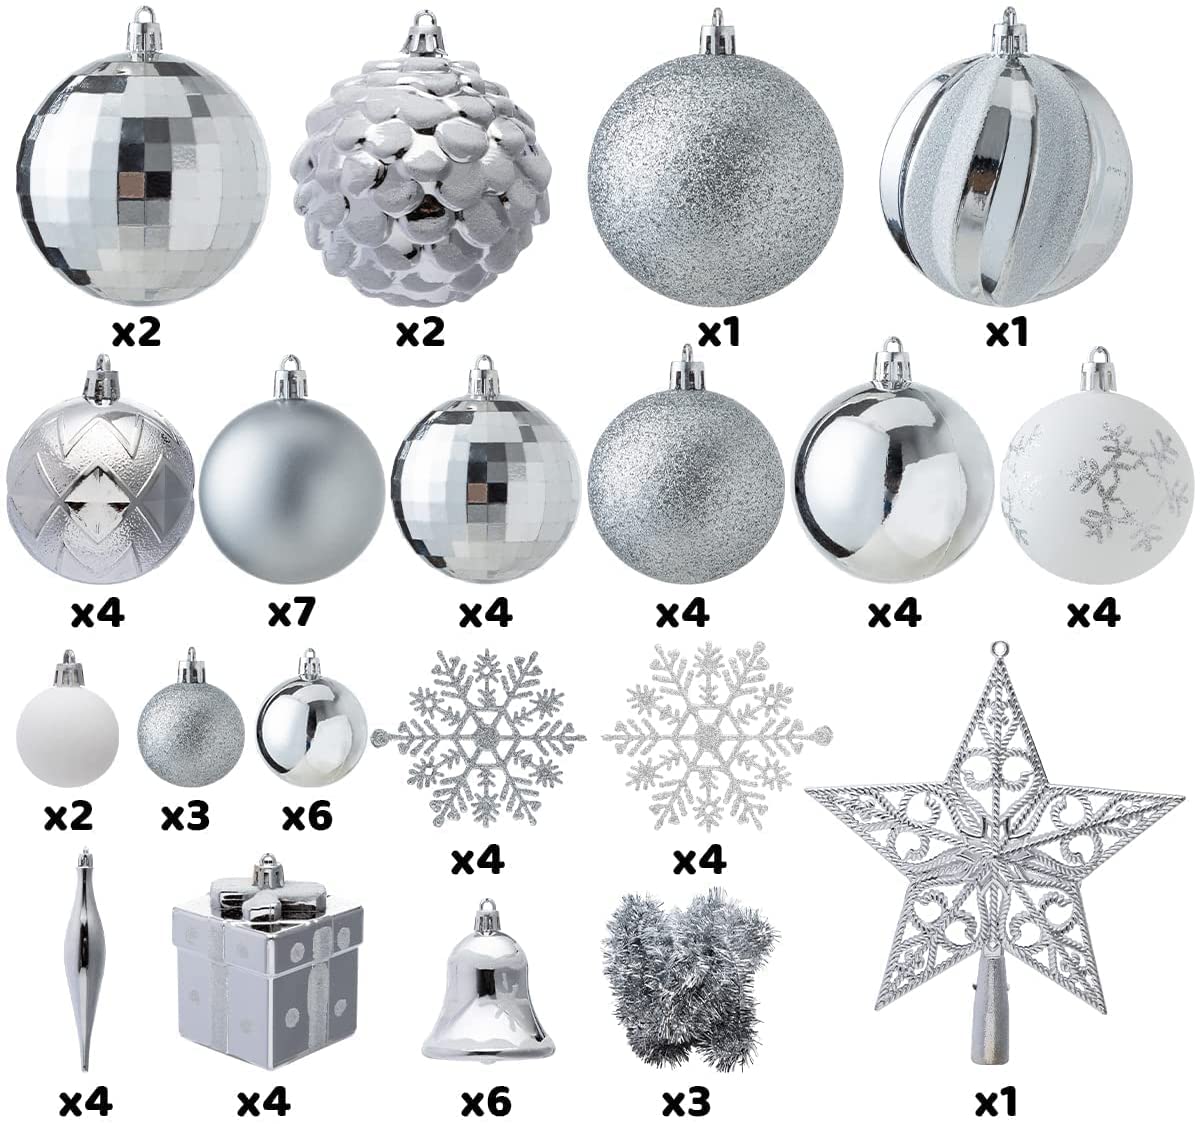 70 Pcs Christmas Ornaments with a Star Tree Topper Silver & White